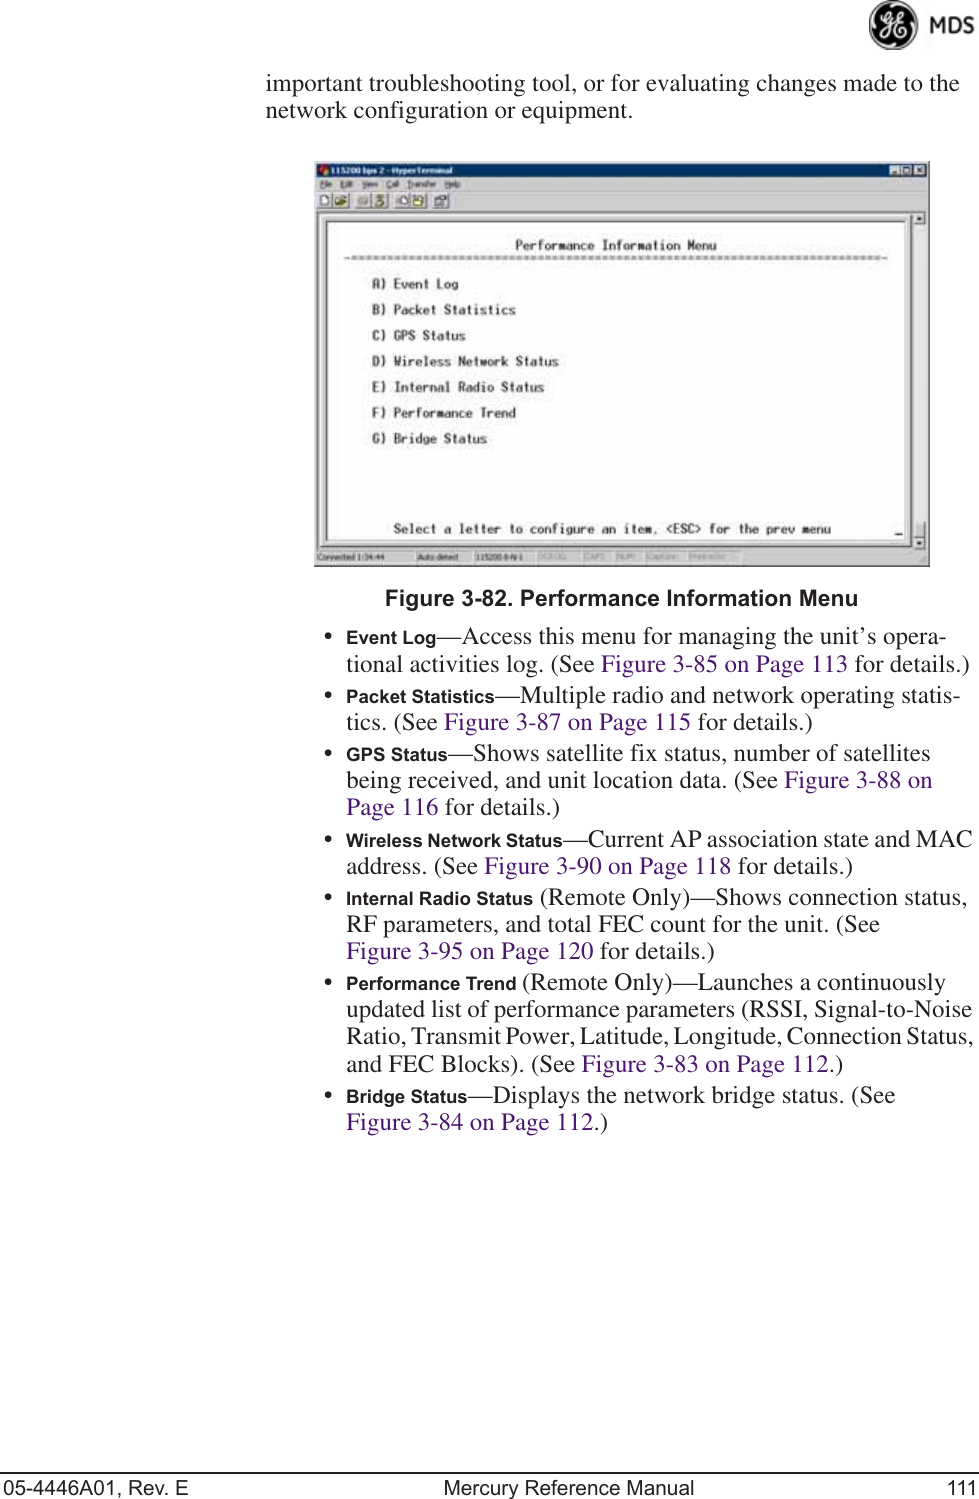 05-4446A01, Rev. E Mercury Reference Manual 111important troubleshooting tool, or for evaluating changes made to the network configuration or equipment.Invisible place holderFigure 3-82. Performance Information Menu•Event Log—Access this menu for managing the unit’s opera-tional activities log. (See Figure 3-85 on Page 113 for details.)•Packet Statistics—Multiple radio and network operating statis-tics. (See Figure 3-87 on Page 115 for details.)•GPS Status—Shows satellite fix status, number of satellites being received, and unit location data. (See Figure 3-88 on Page 116 for details.)•Wireless Network Status—Current AP association state and MAC address. (See Figure 3-90 on Page 118 for details.)•Internal Radio Status (Remote Only)—Shows connection status, RF parameters, and total FEC count for the unit. (See Figure 3-95 on Page 120 for details.)•Performance Trend (Remote Only)—Launches a continuously updated list of performance parameters (RSSI, Signal-to-Noise Ratio, Transmit Power, Latitude, Longitude, Connection Status, and FEC Blocks). (See Figure 3-83 on Page 112.)•Bridge Status—Displays the network bridge status. (See Figure 3-84 on Page 112.)